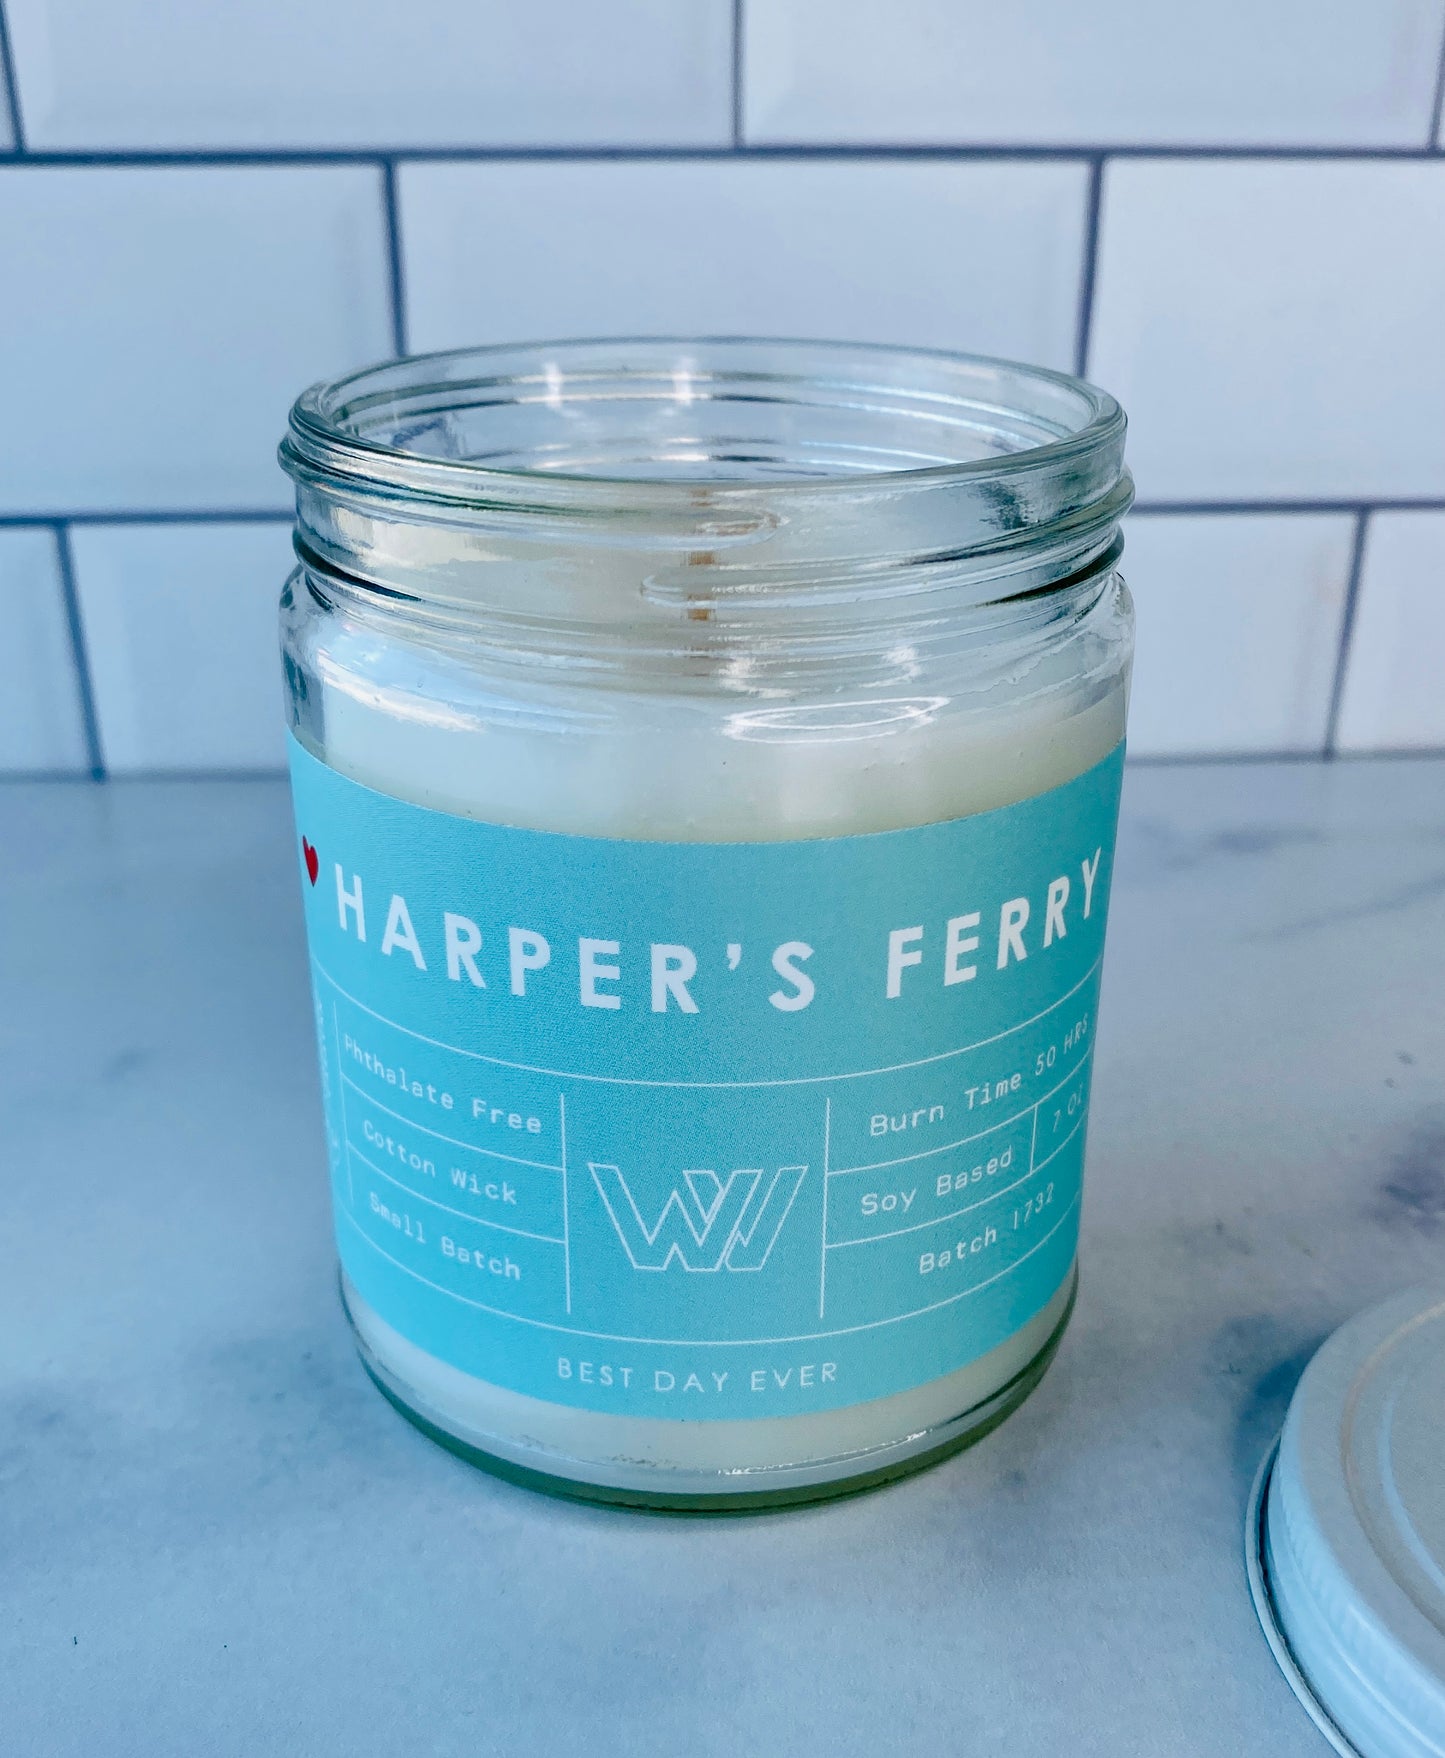 Harper's Ferry, WV Candle